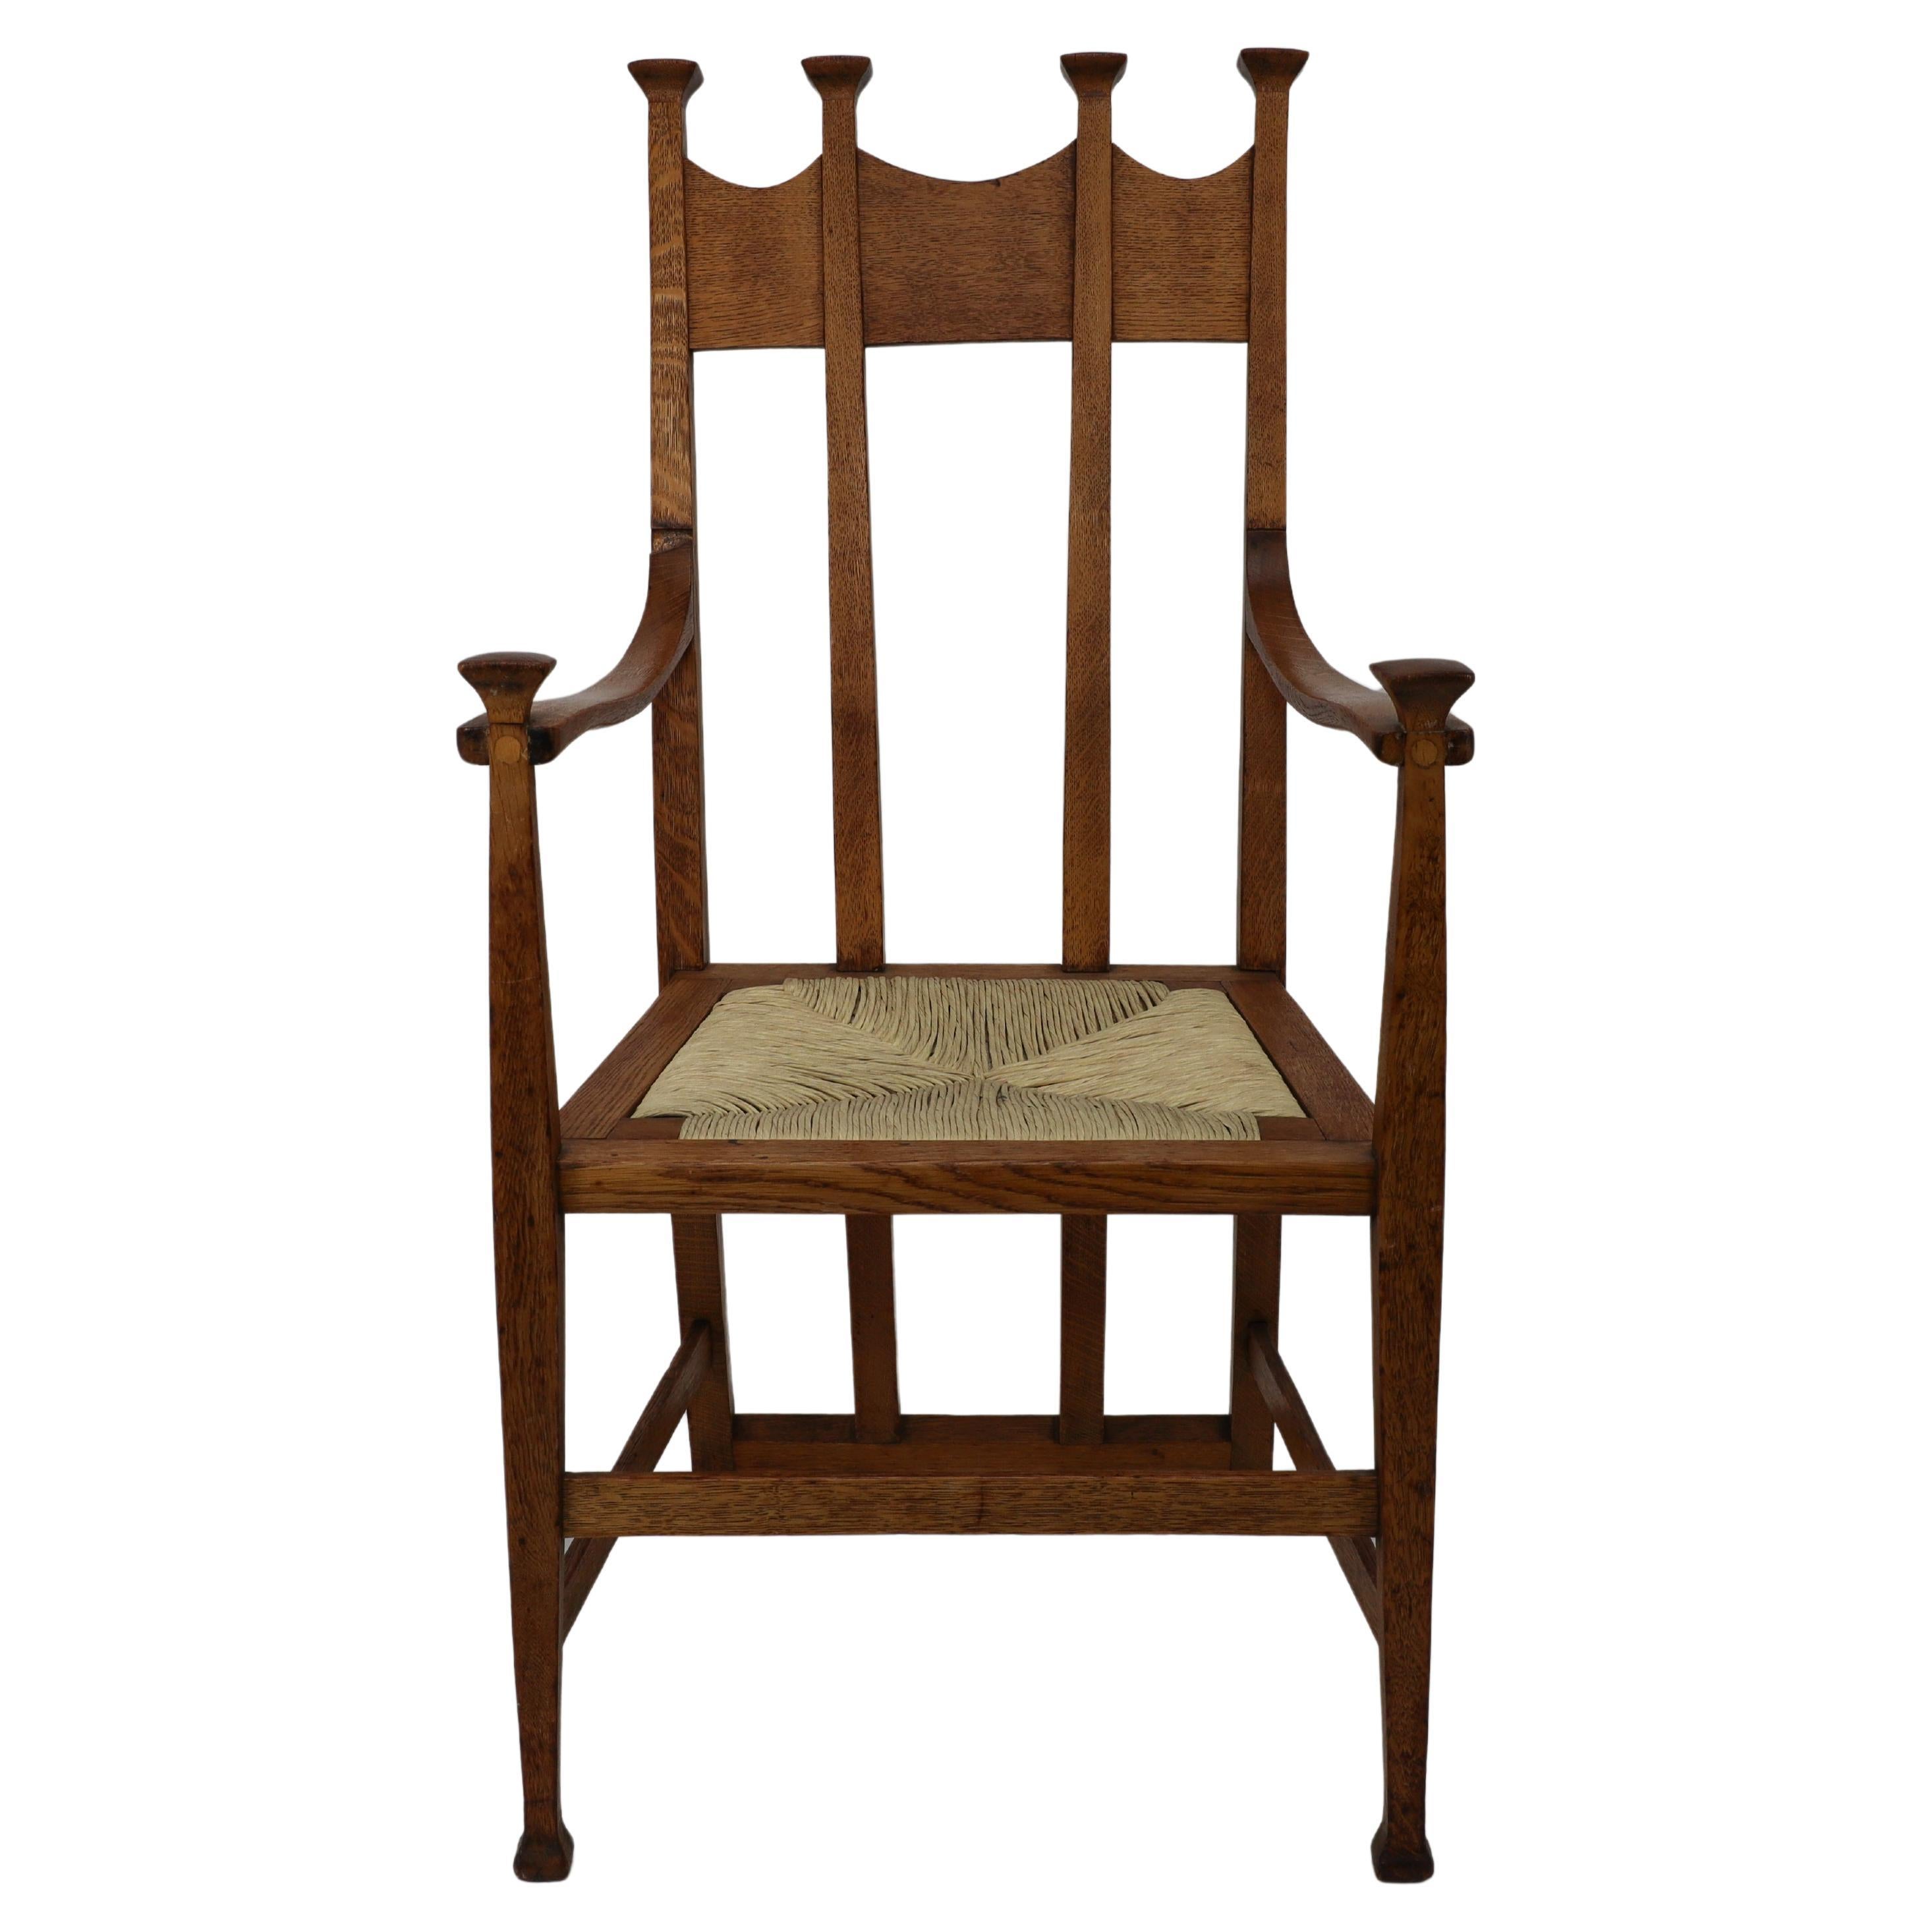 George Montague Ellwood. Made by J S Henry. An Arts and Crafts oak dining chair with throne like capped tops and sweeping back supports standing on tapering square legs. One available the price quoted £2800 is for one armchair.
